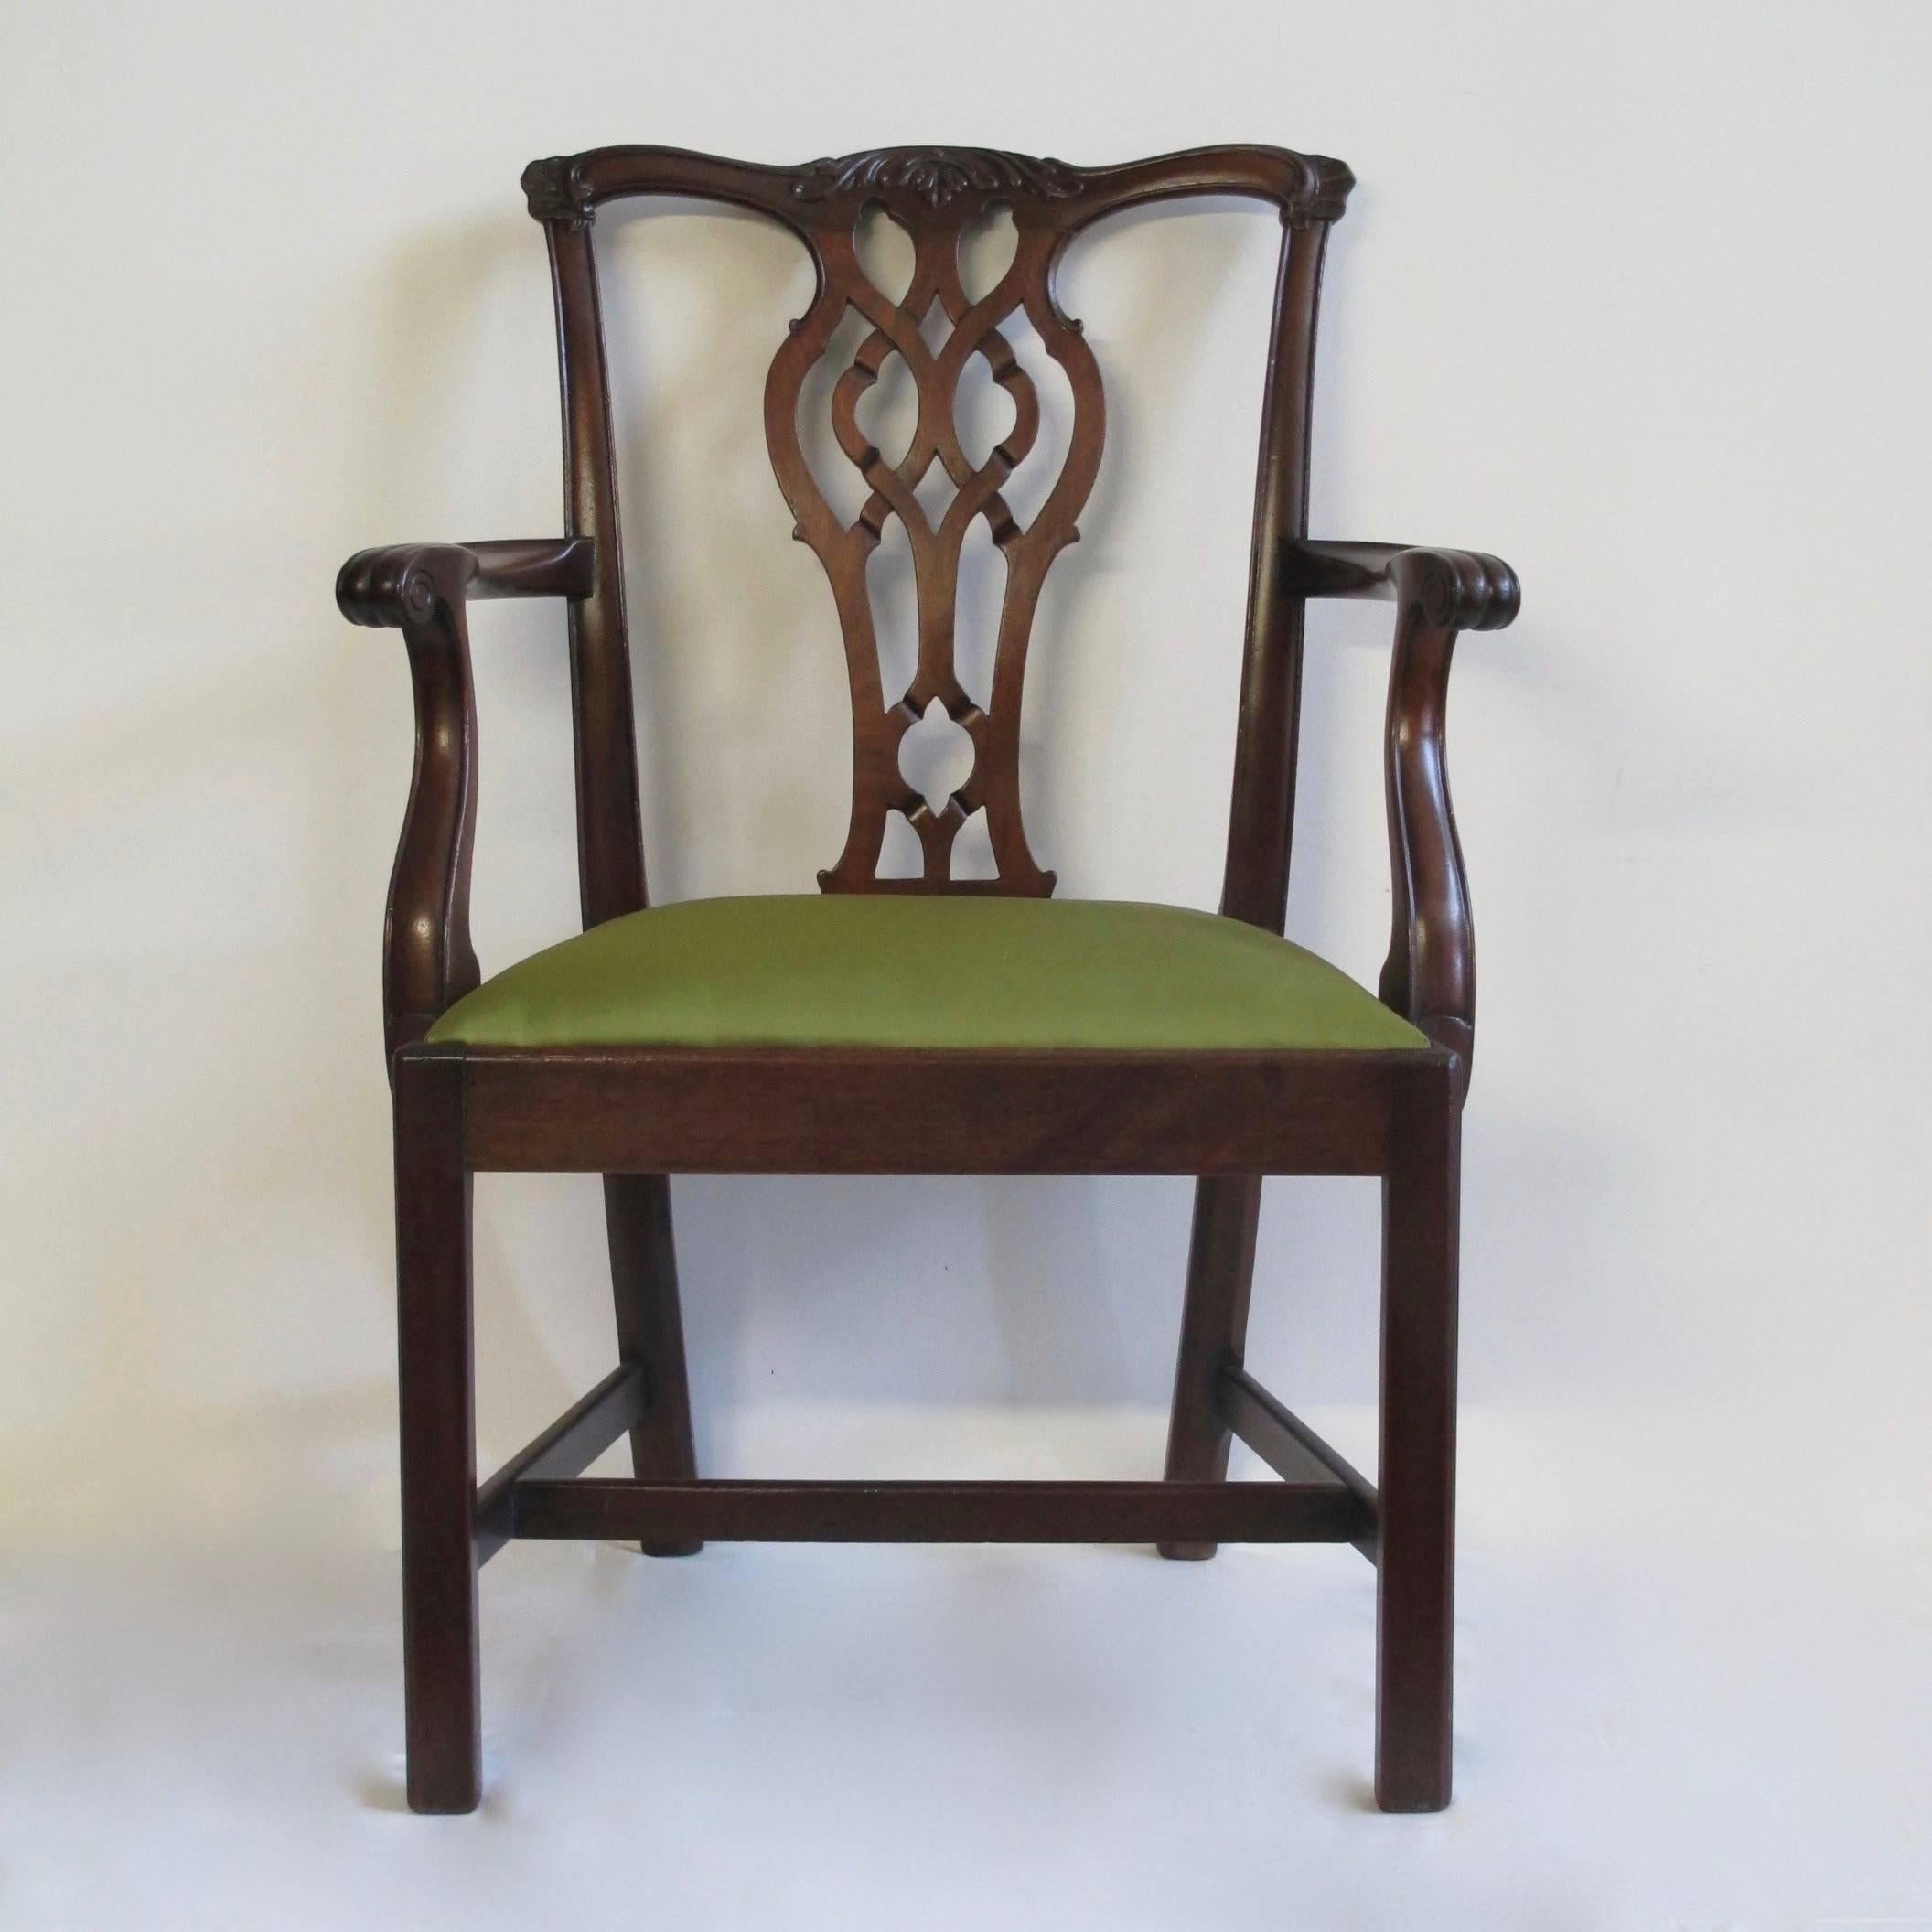 A matched set of 14 Chippendale style dining chairs consisting of two armchairs and 12 side chairs, newly reupholstered. Beautifully hand-carved with ribbon back, acanthus leaf and floret ear detail. Armchairs (handmade) later (early 20th century).